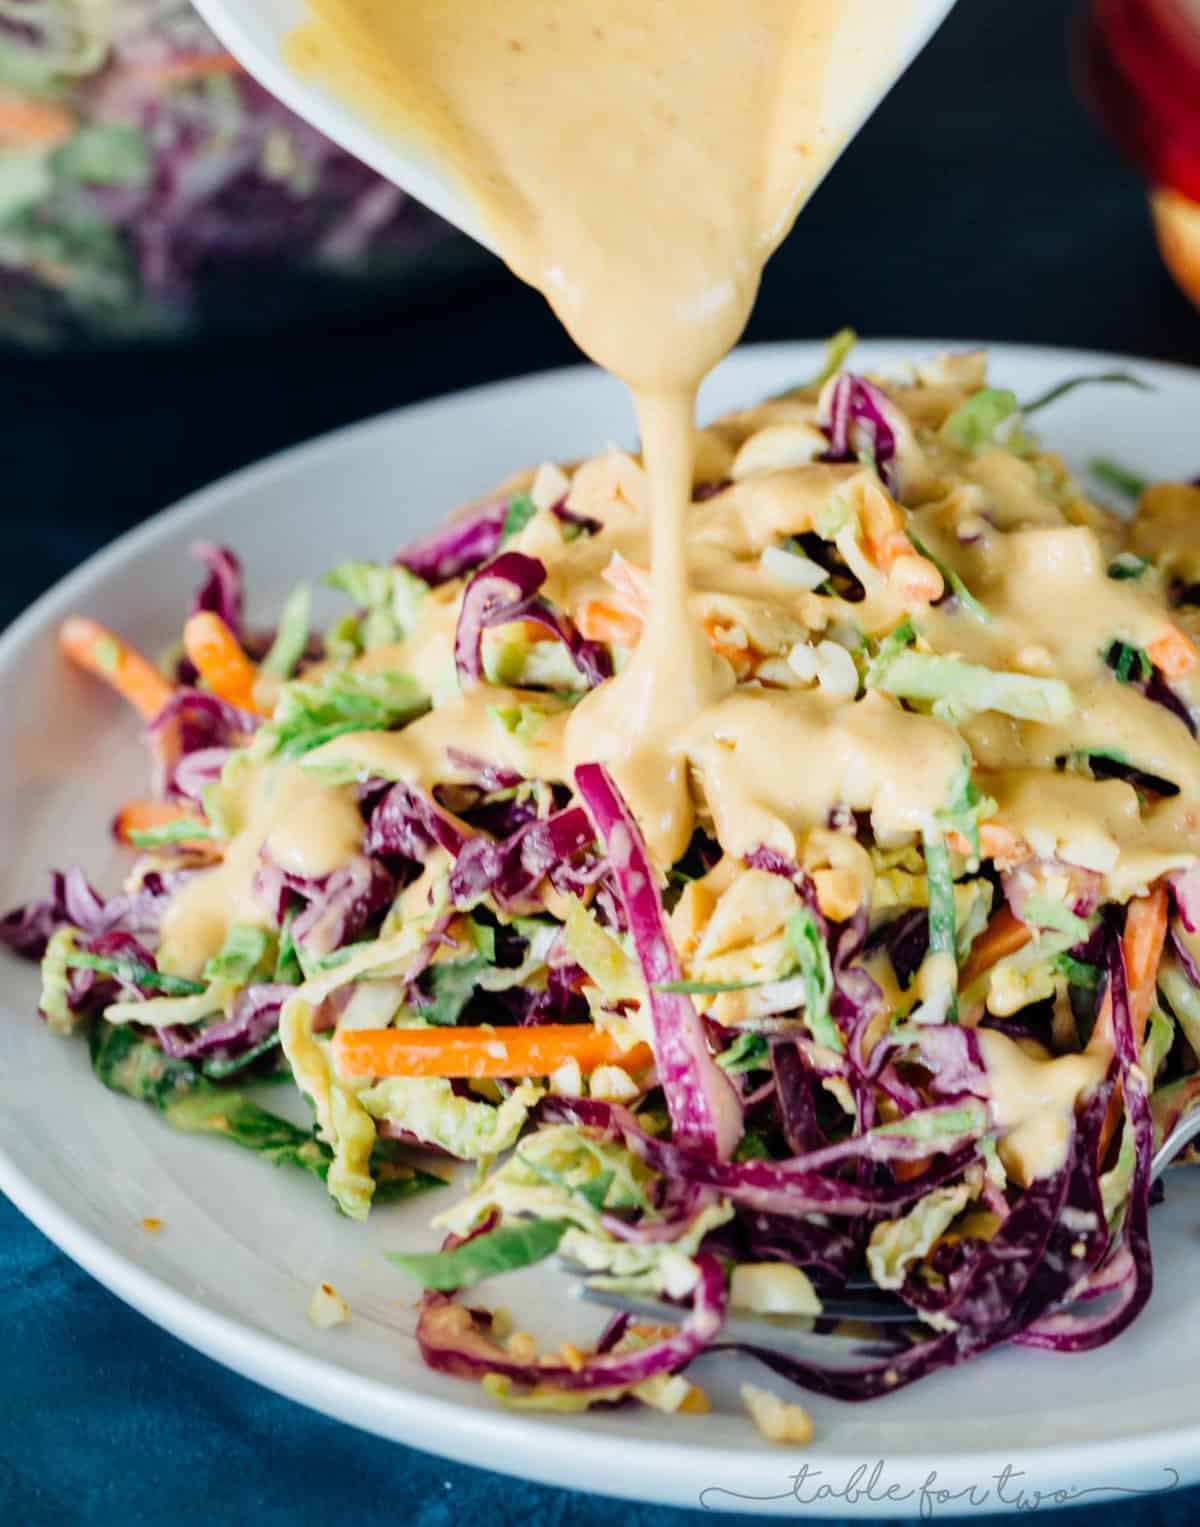 This cabbage slaw is a crisp and refreshing side dish for your next gathering! The creamy hummus dressing made with @sabradips classic hummus is going to be one of your new favorites to drizzle on everything! #ad